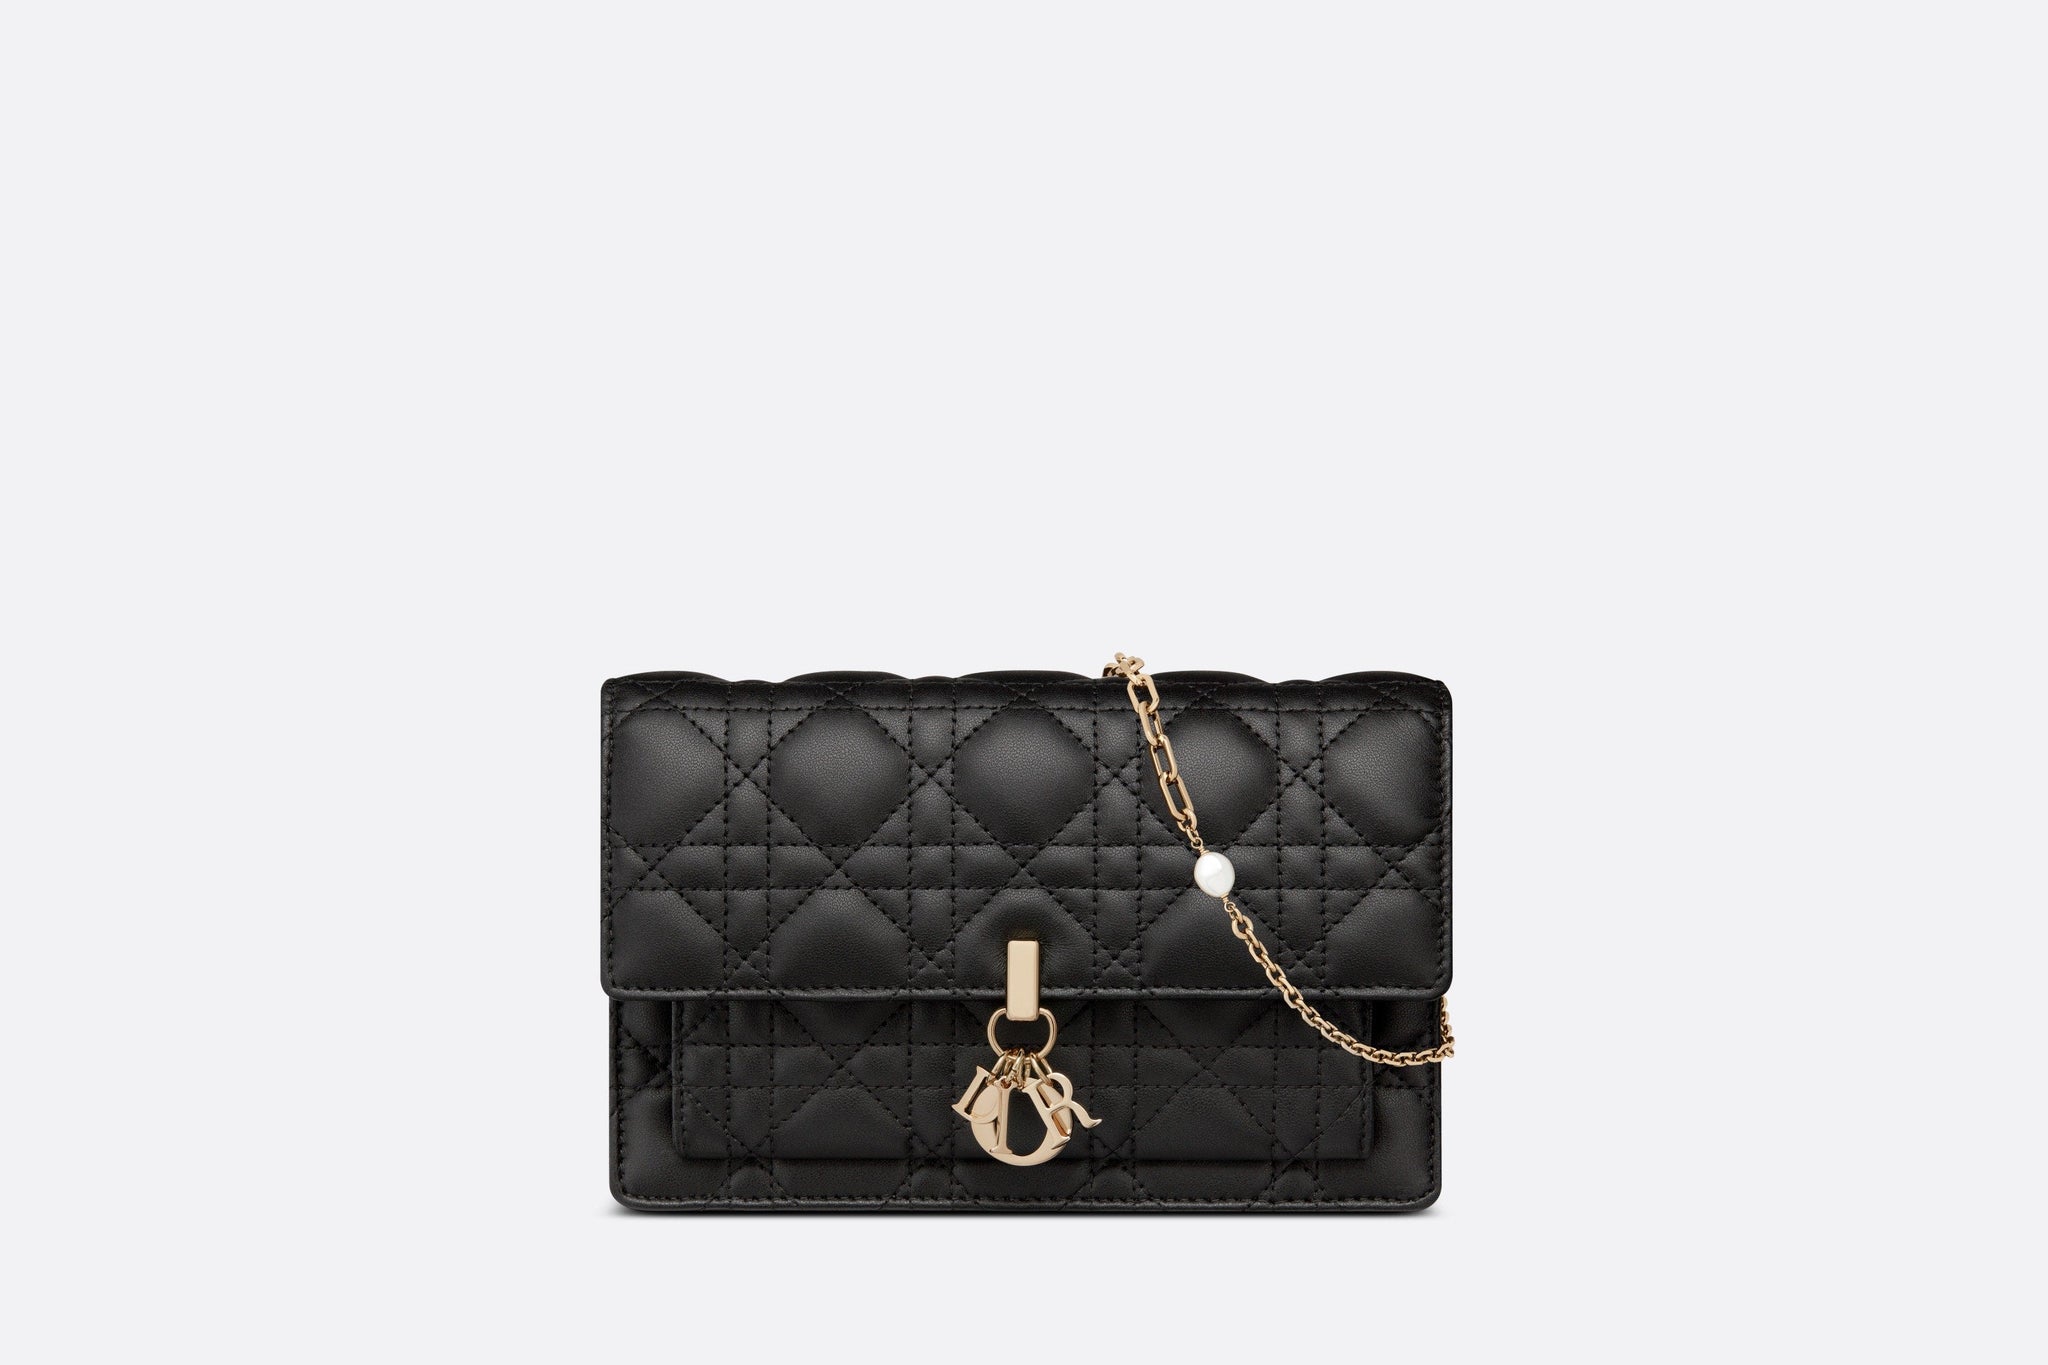 CHRISTIAN DIOR Lambskin Cannage Studded Dioraddict Wallet on Chain Clutch  Nude 344254  FASHIONPHILE